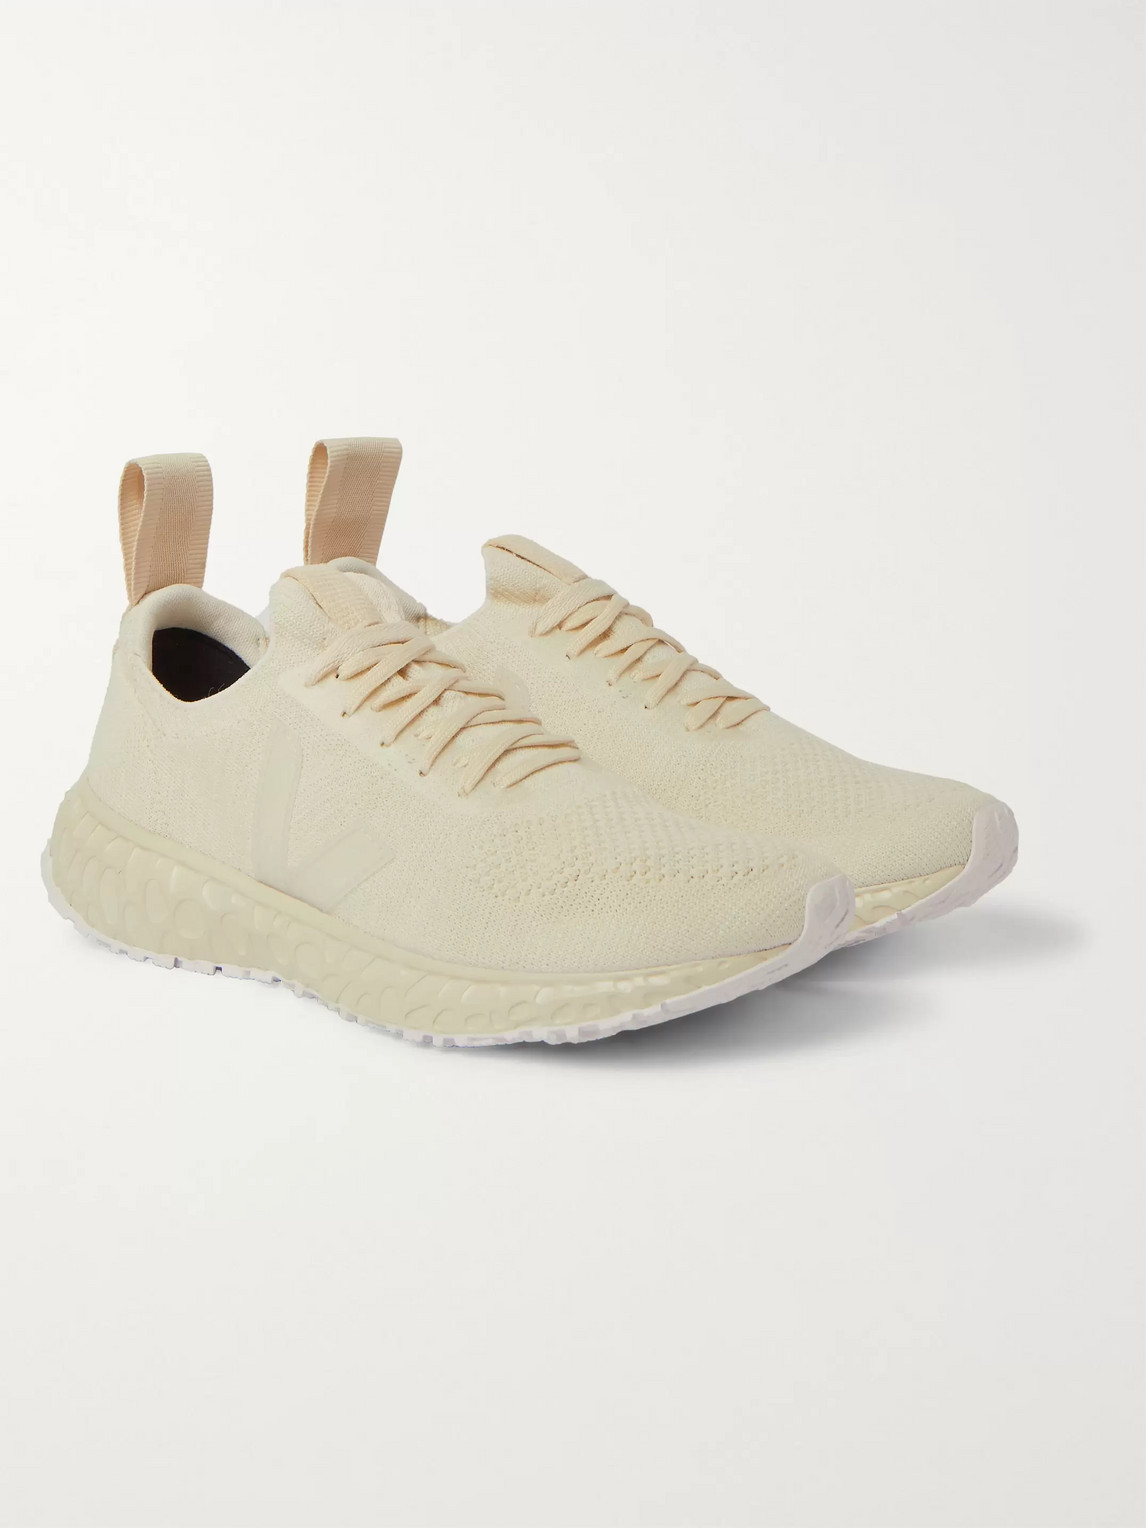 RICK OWENS VEJA RUBBER-TRIMMED STRETCH-KNIT SNEAKERS